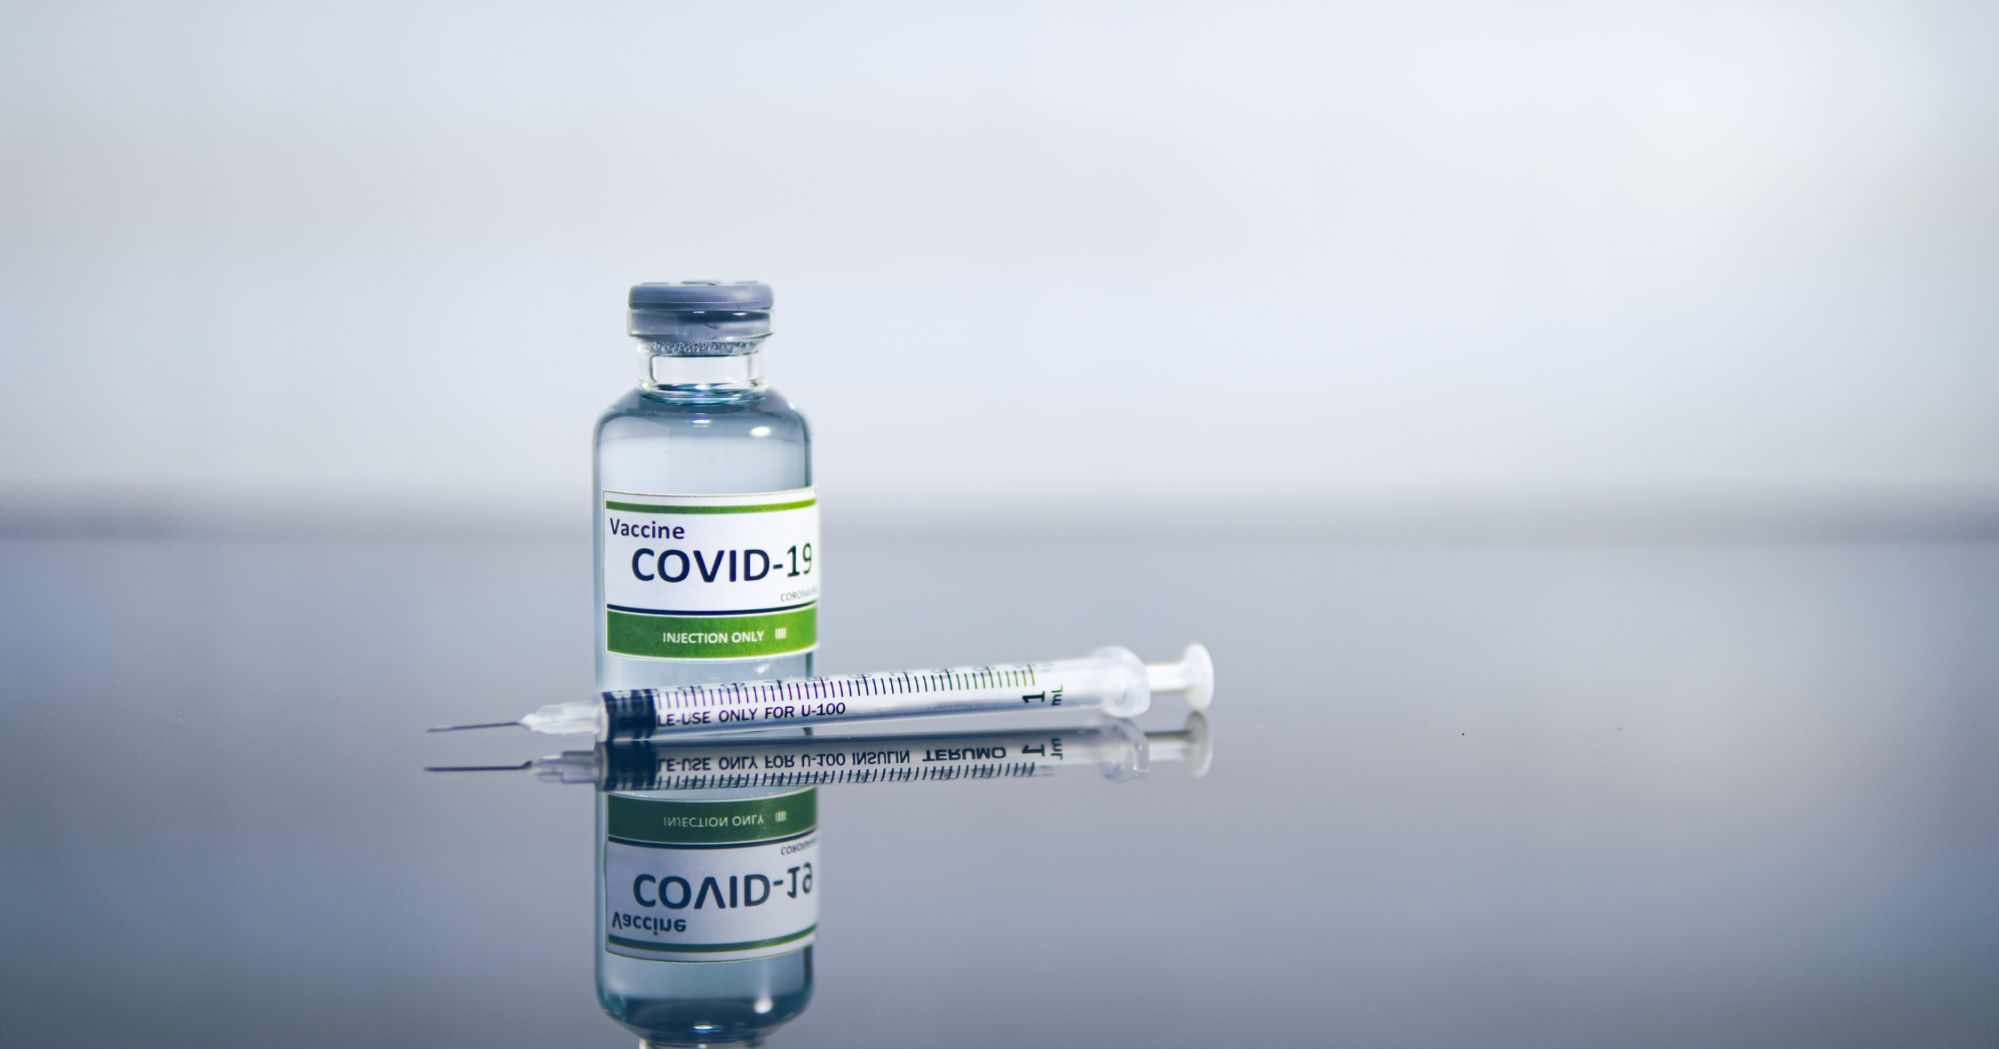 i’m-getting-the-covid-19-vaccine.-it’s-the-end-of-one-concern-and-the-beginning-of-more